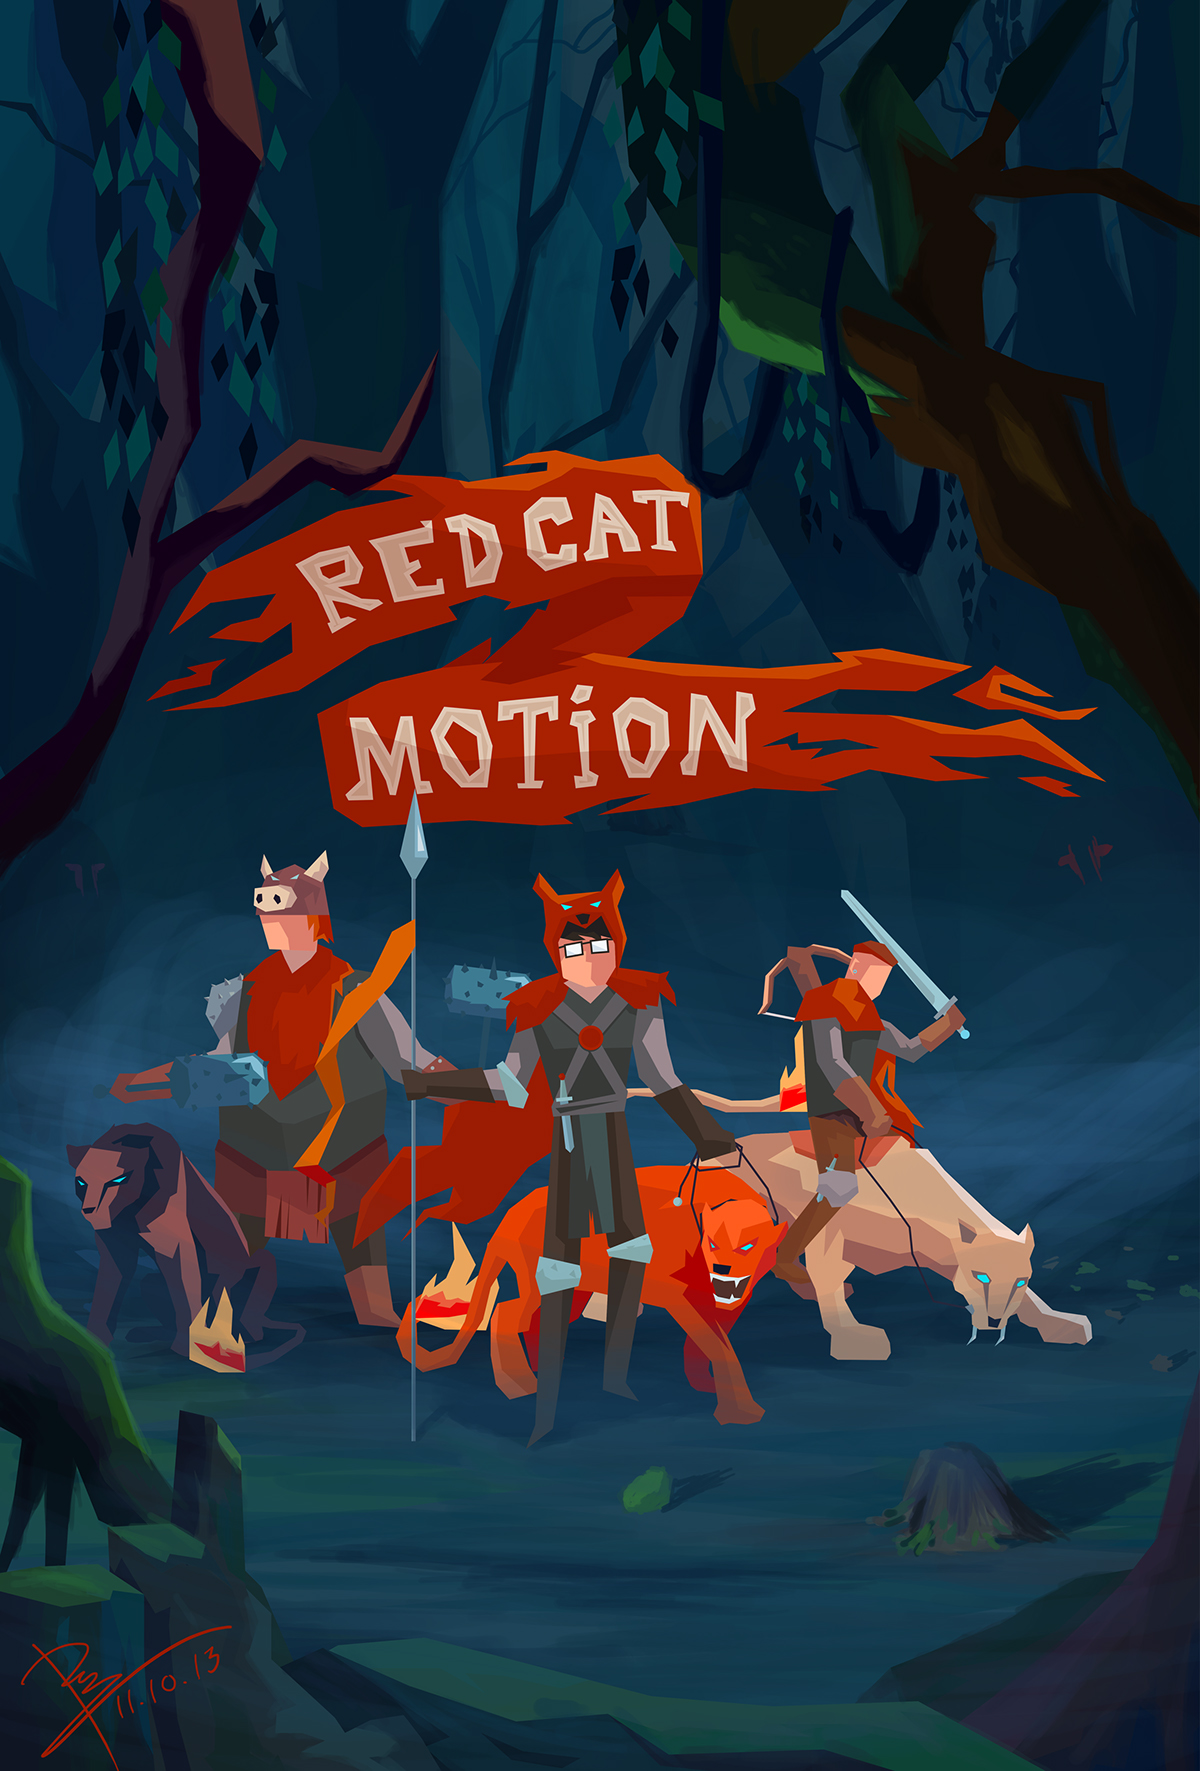 red Cat motion personal banner passion vietnam Leo dinh vector